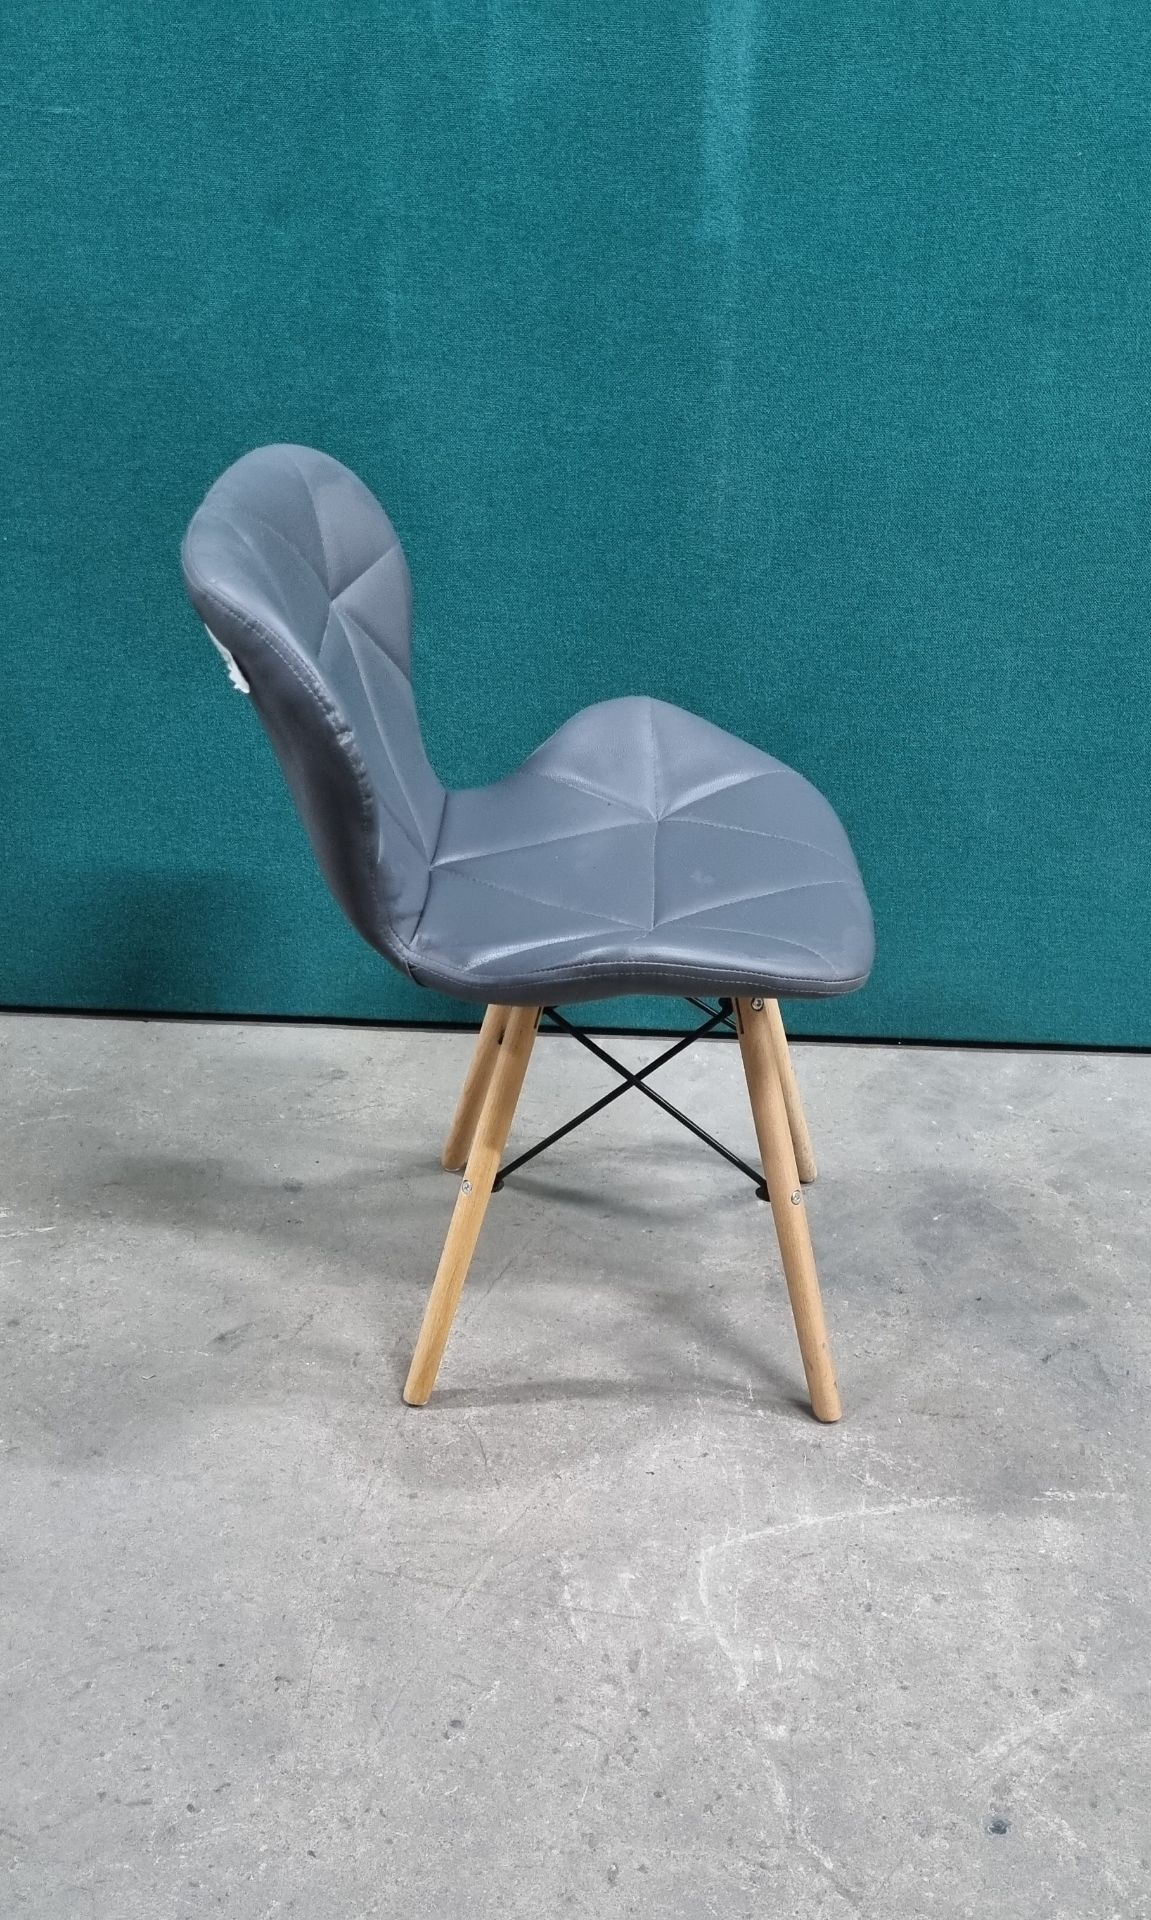 Grey Leather Effect Chair With Pine Legs 710mm High - Image 2 of 3